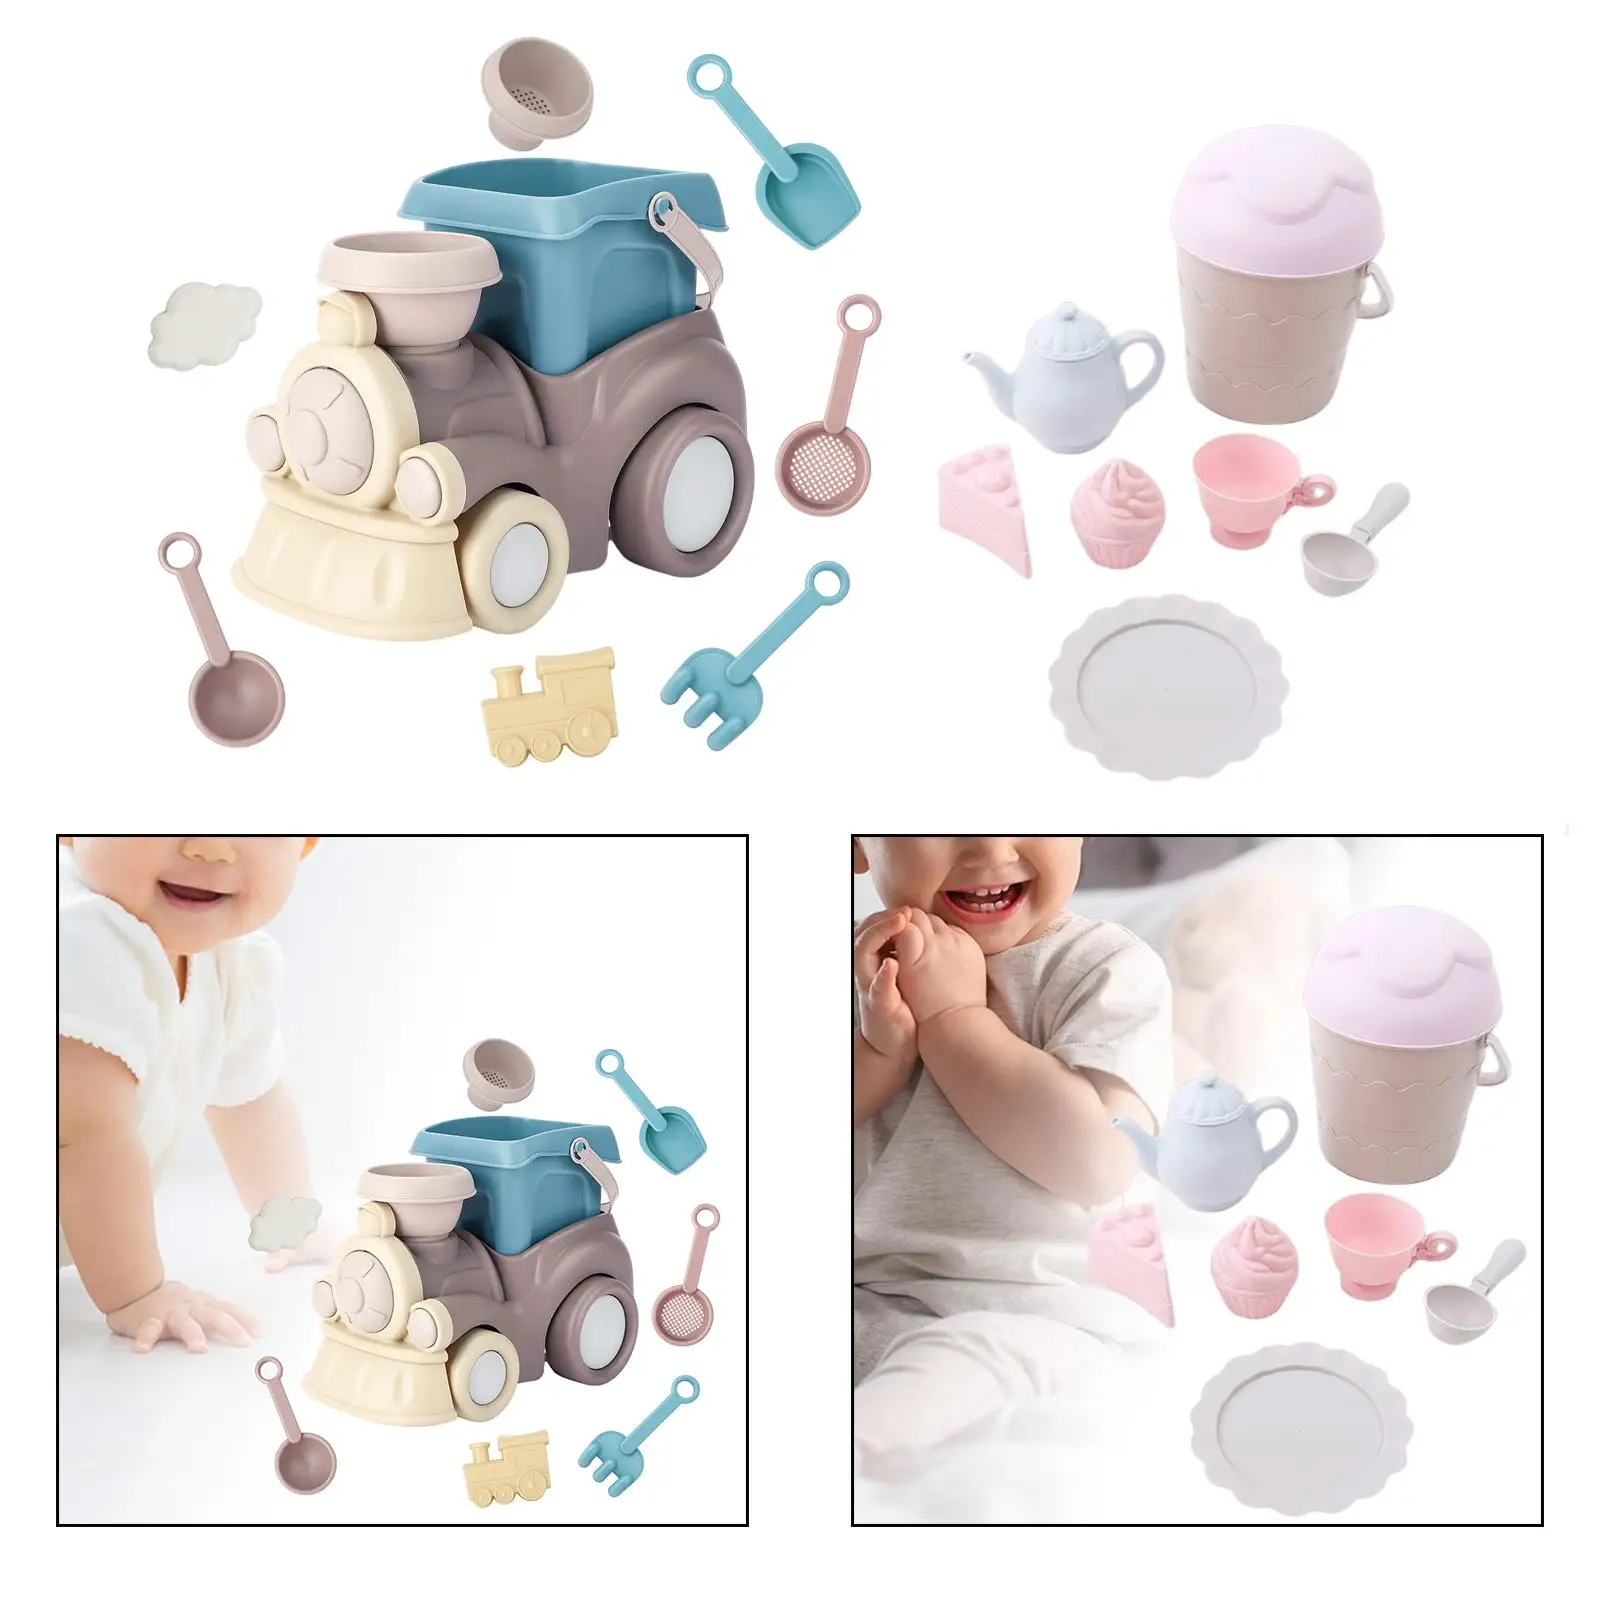 Summer Beach Toys Reusable Tools Interactive Sand Gadgets Ice Cream Bucket Beach Toy for Playground Sandpit Travel Beach Outdoor